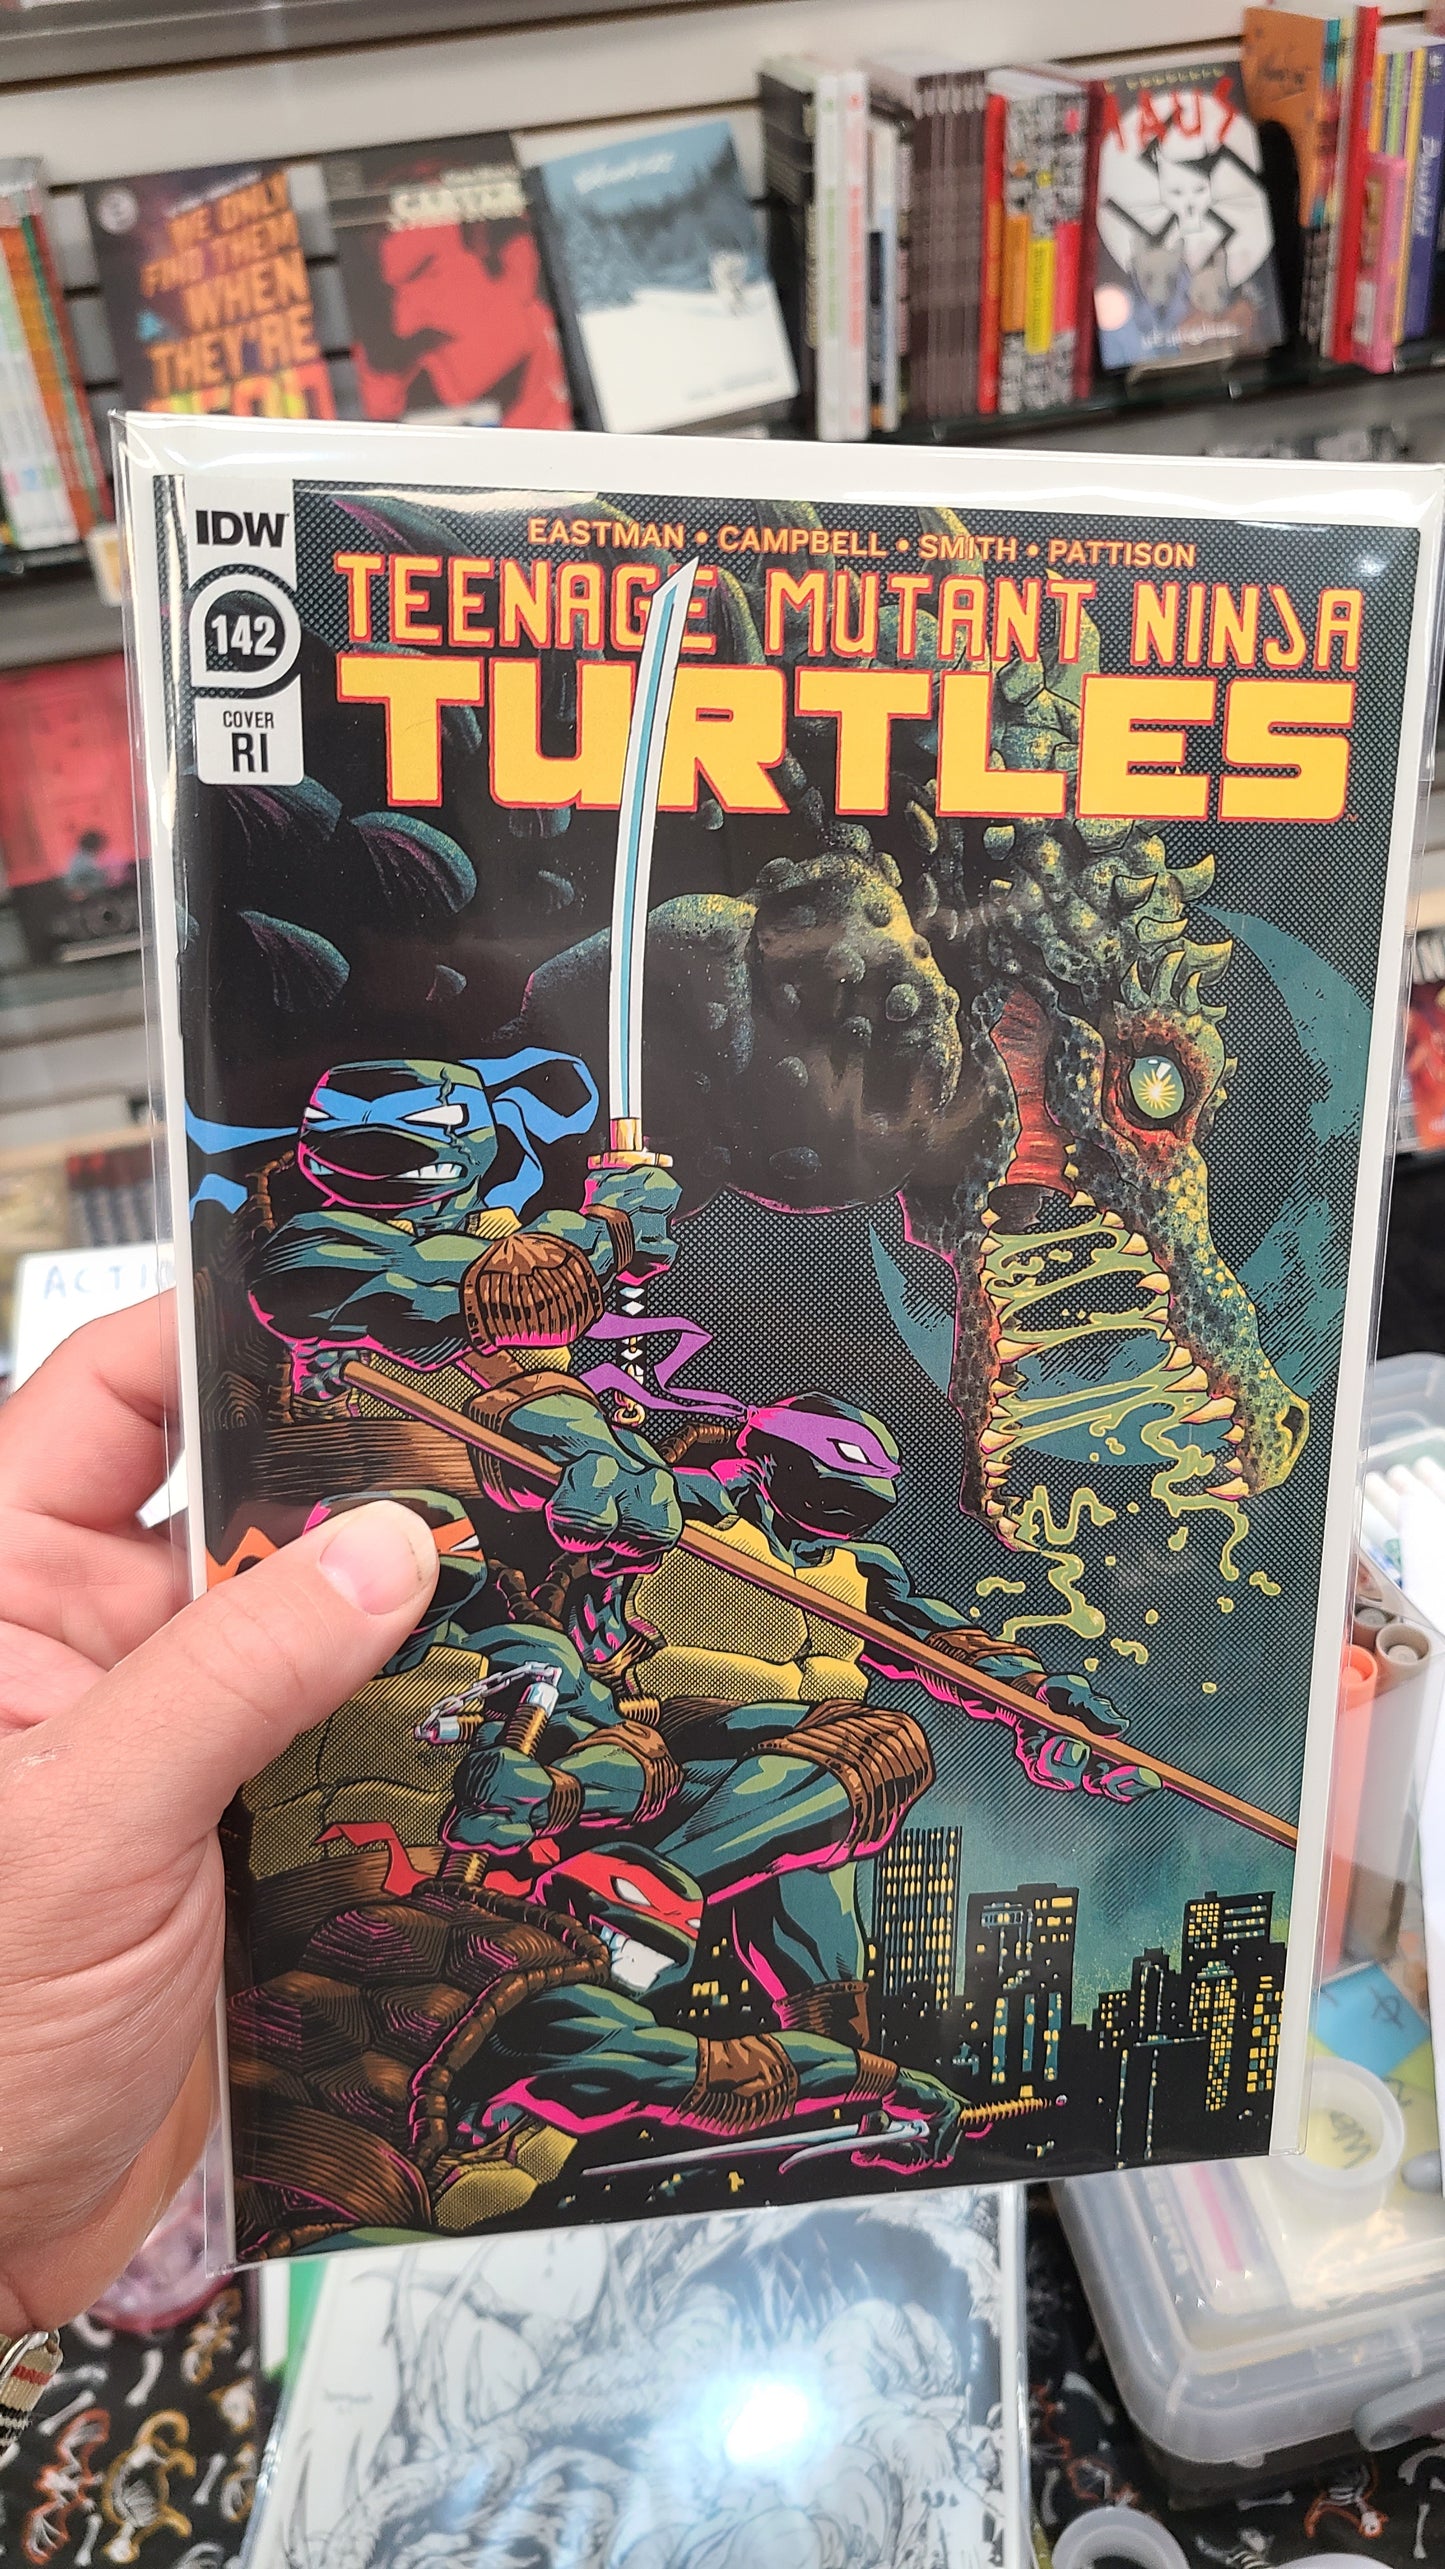 TMNT ONGOING #142 1:10 BY J. GONZO